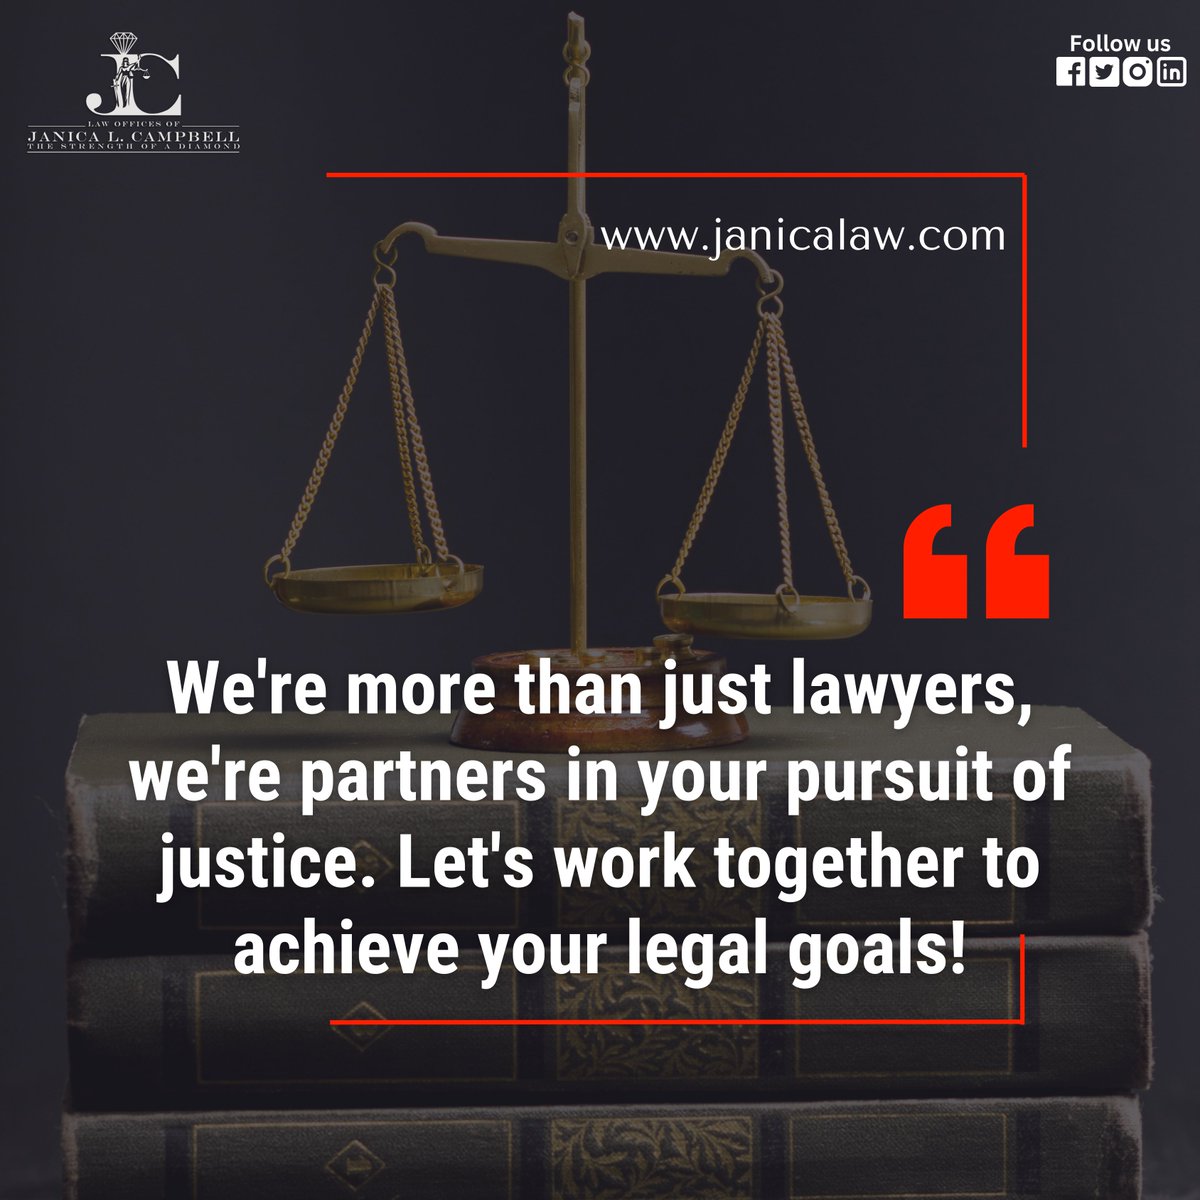 👩‍⚖️🌟 We're more than just lawyers, we're partners in your pursuit of justice. Let's work together to achieve your legal goals! 💼 

Visit our website: janicalaw.com

#LegalPartners #JusticeSeekers #LegalAdvice #LegalConsultation #LegalExperts #LawFirmLife #LegalServices